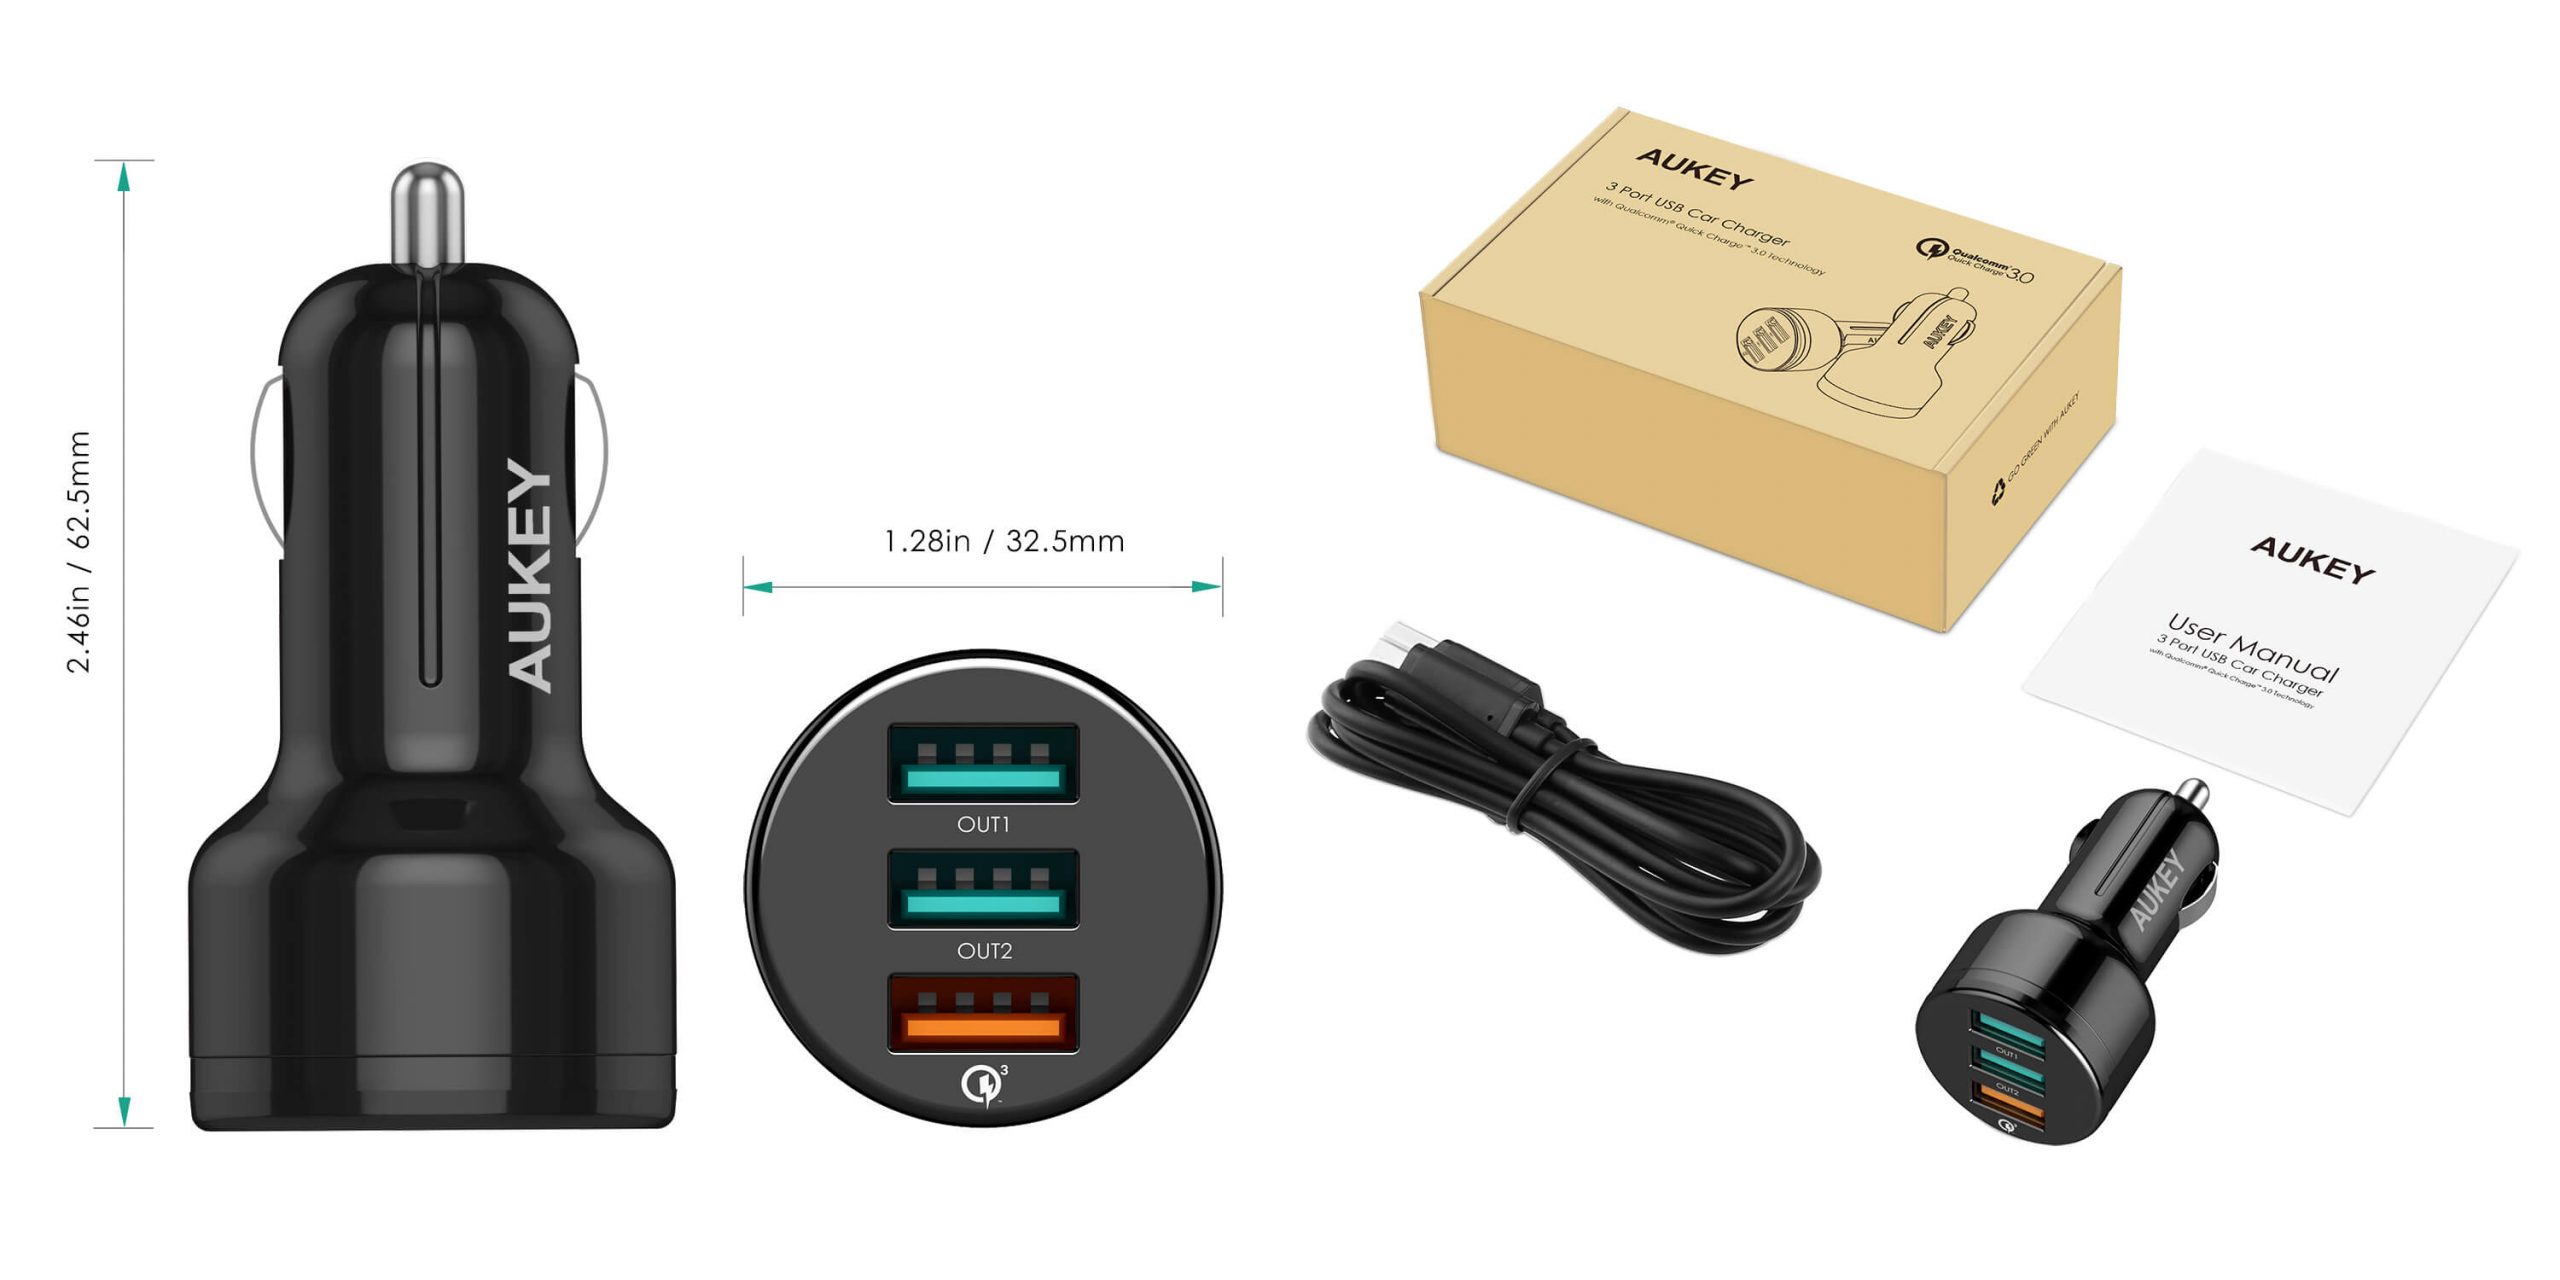 Aukey CC-T11 Charger Free Giveaway to first 10 Reviewers